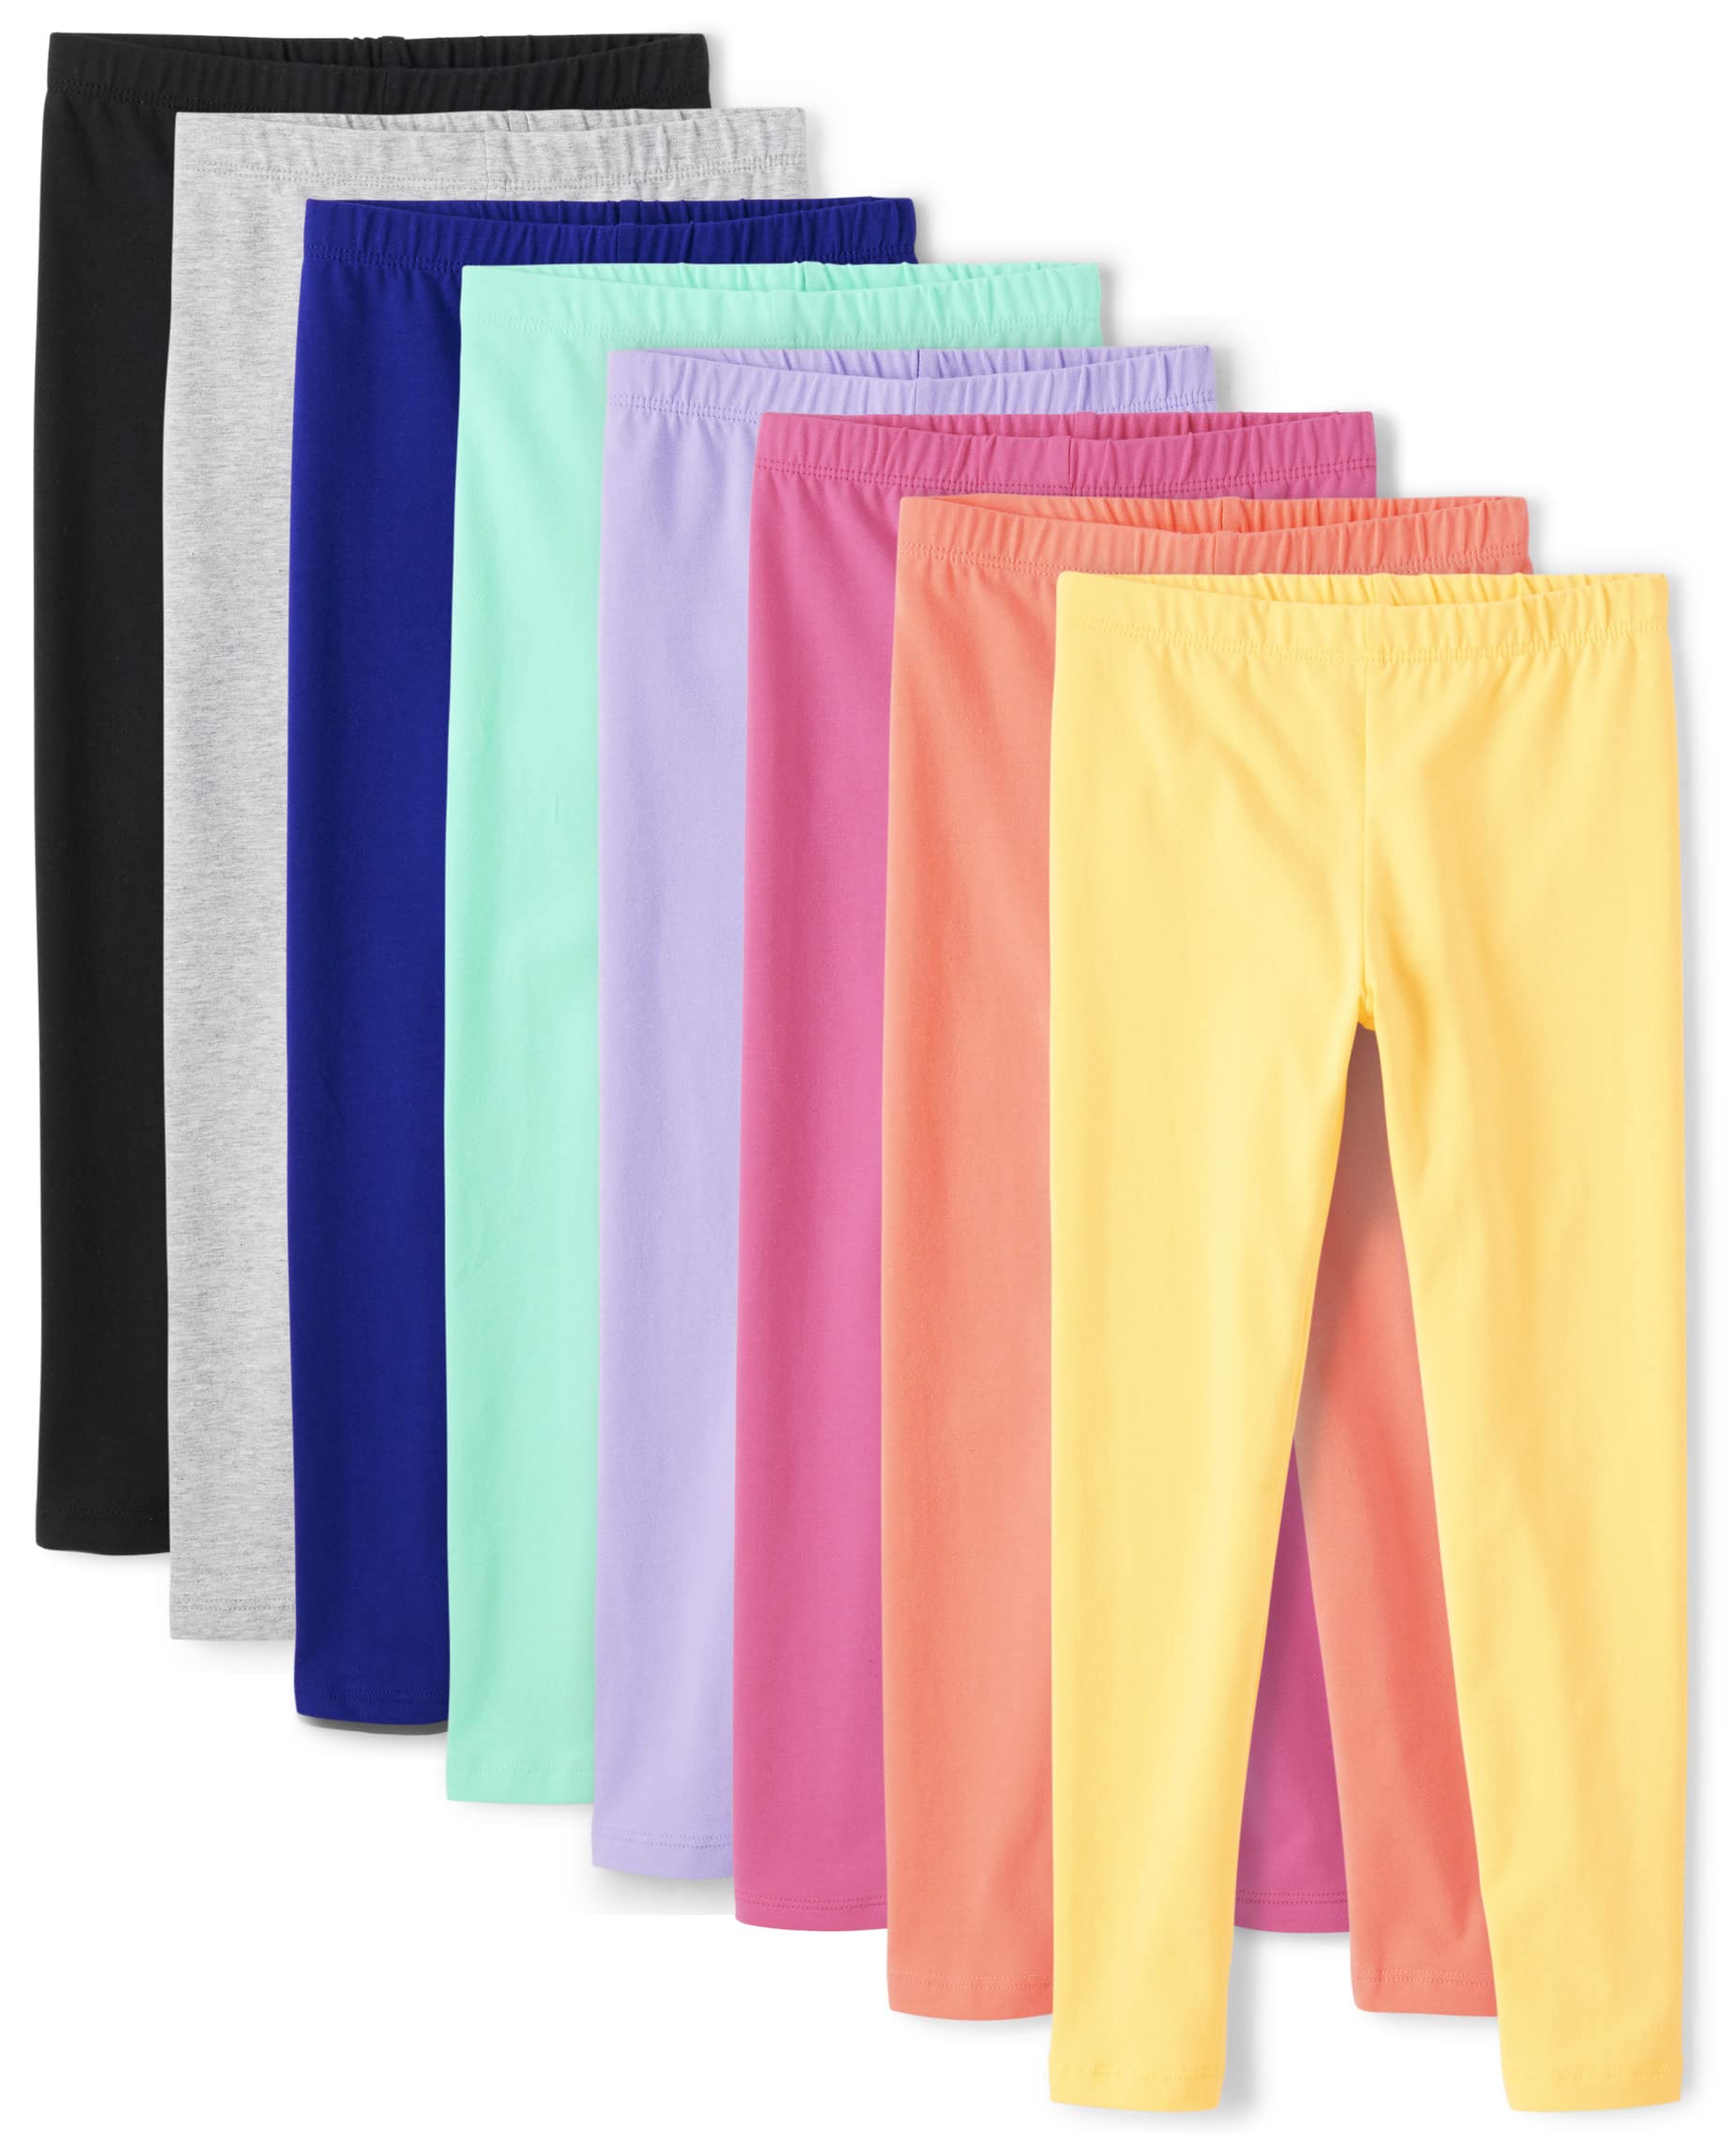 The Children's Place Girls' Solid Leggings 8-Pack, French Rose Multi Color, Small (5/6)